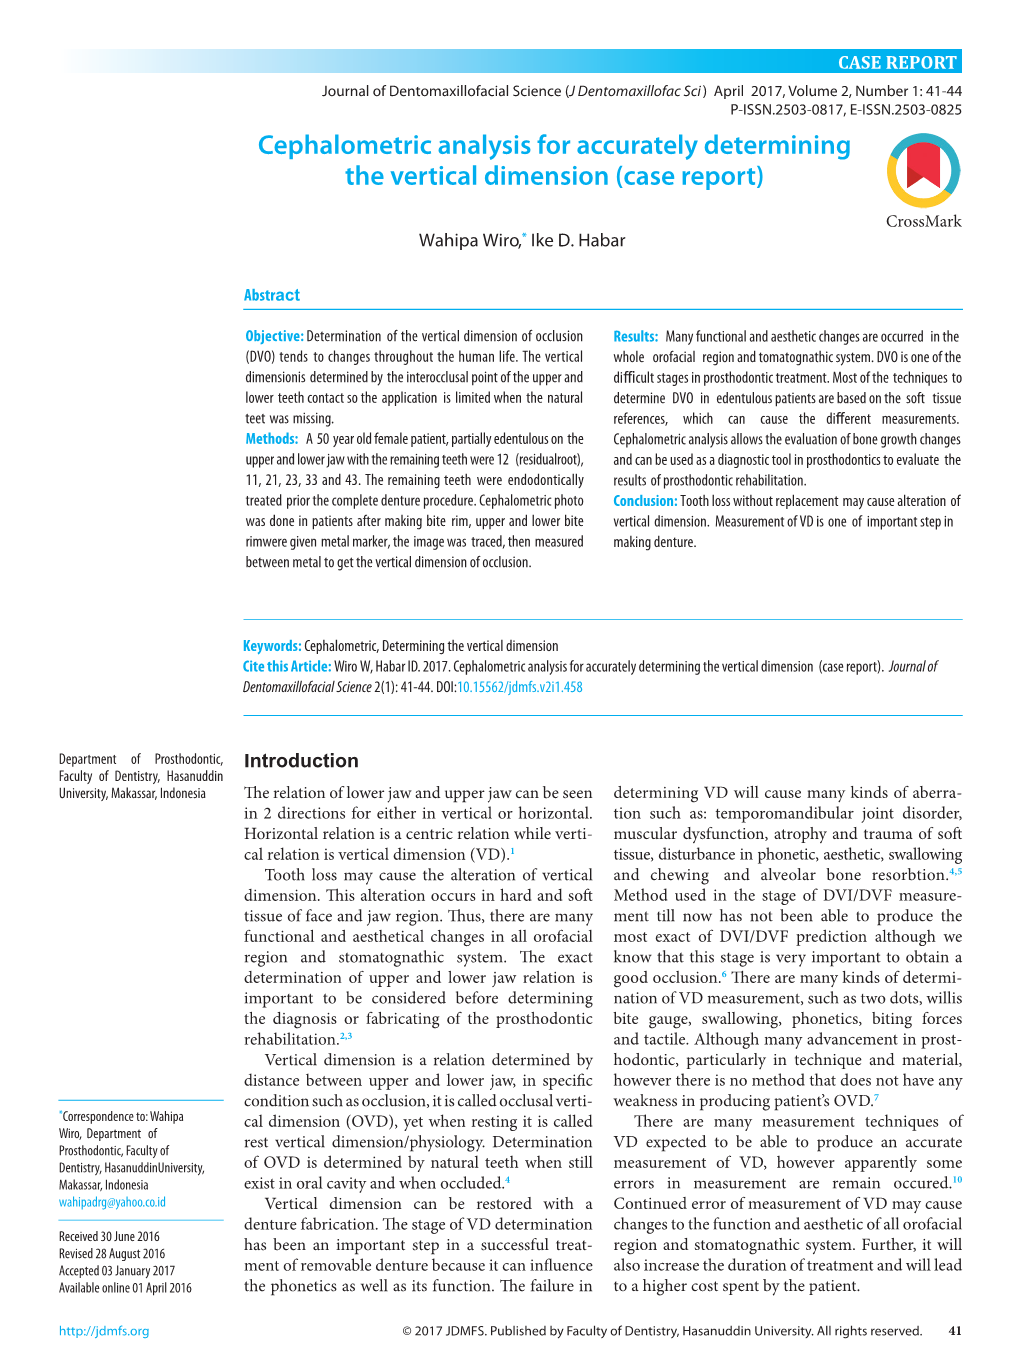 Cephalometric Analysis for Accurately Determining the Vertical Dimension (Case Report)